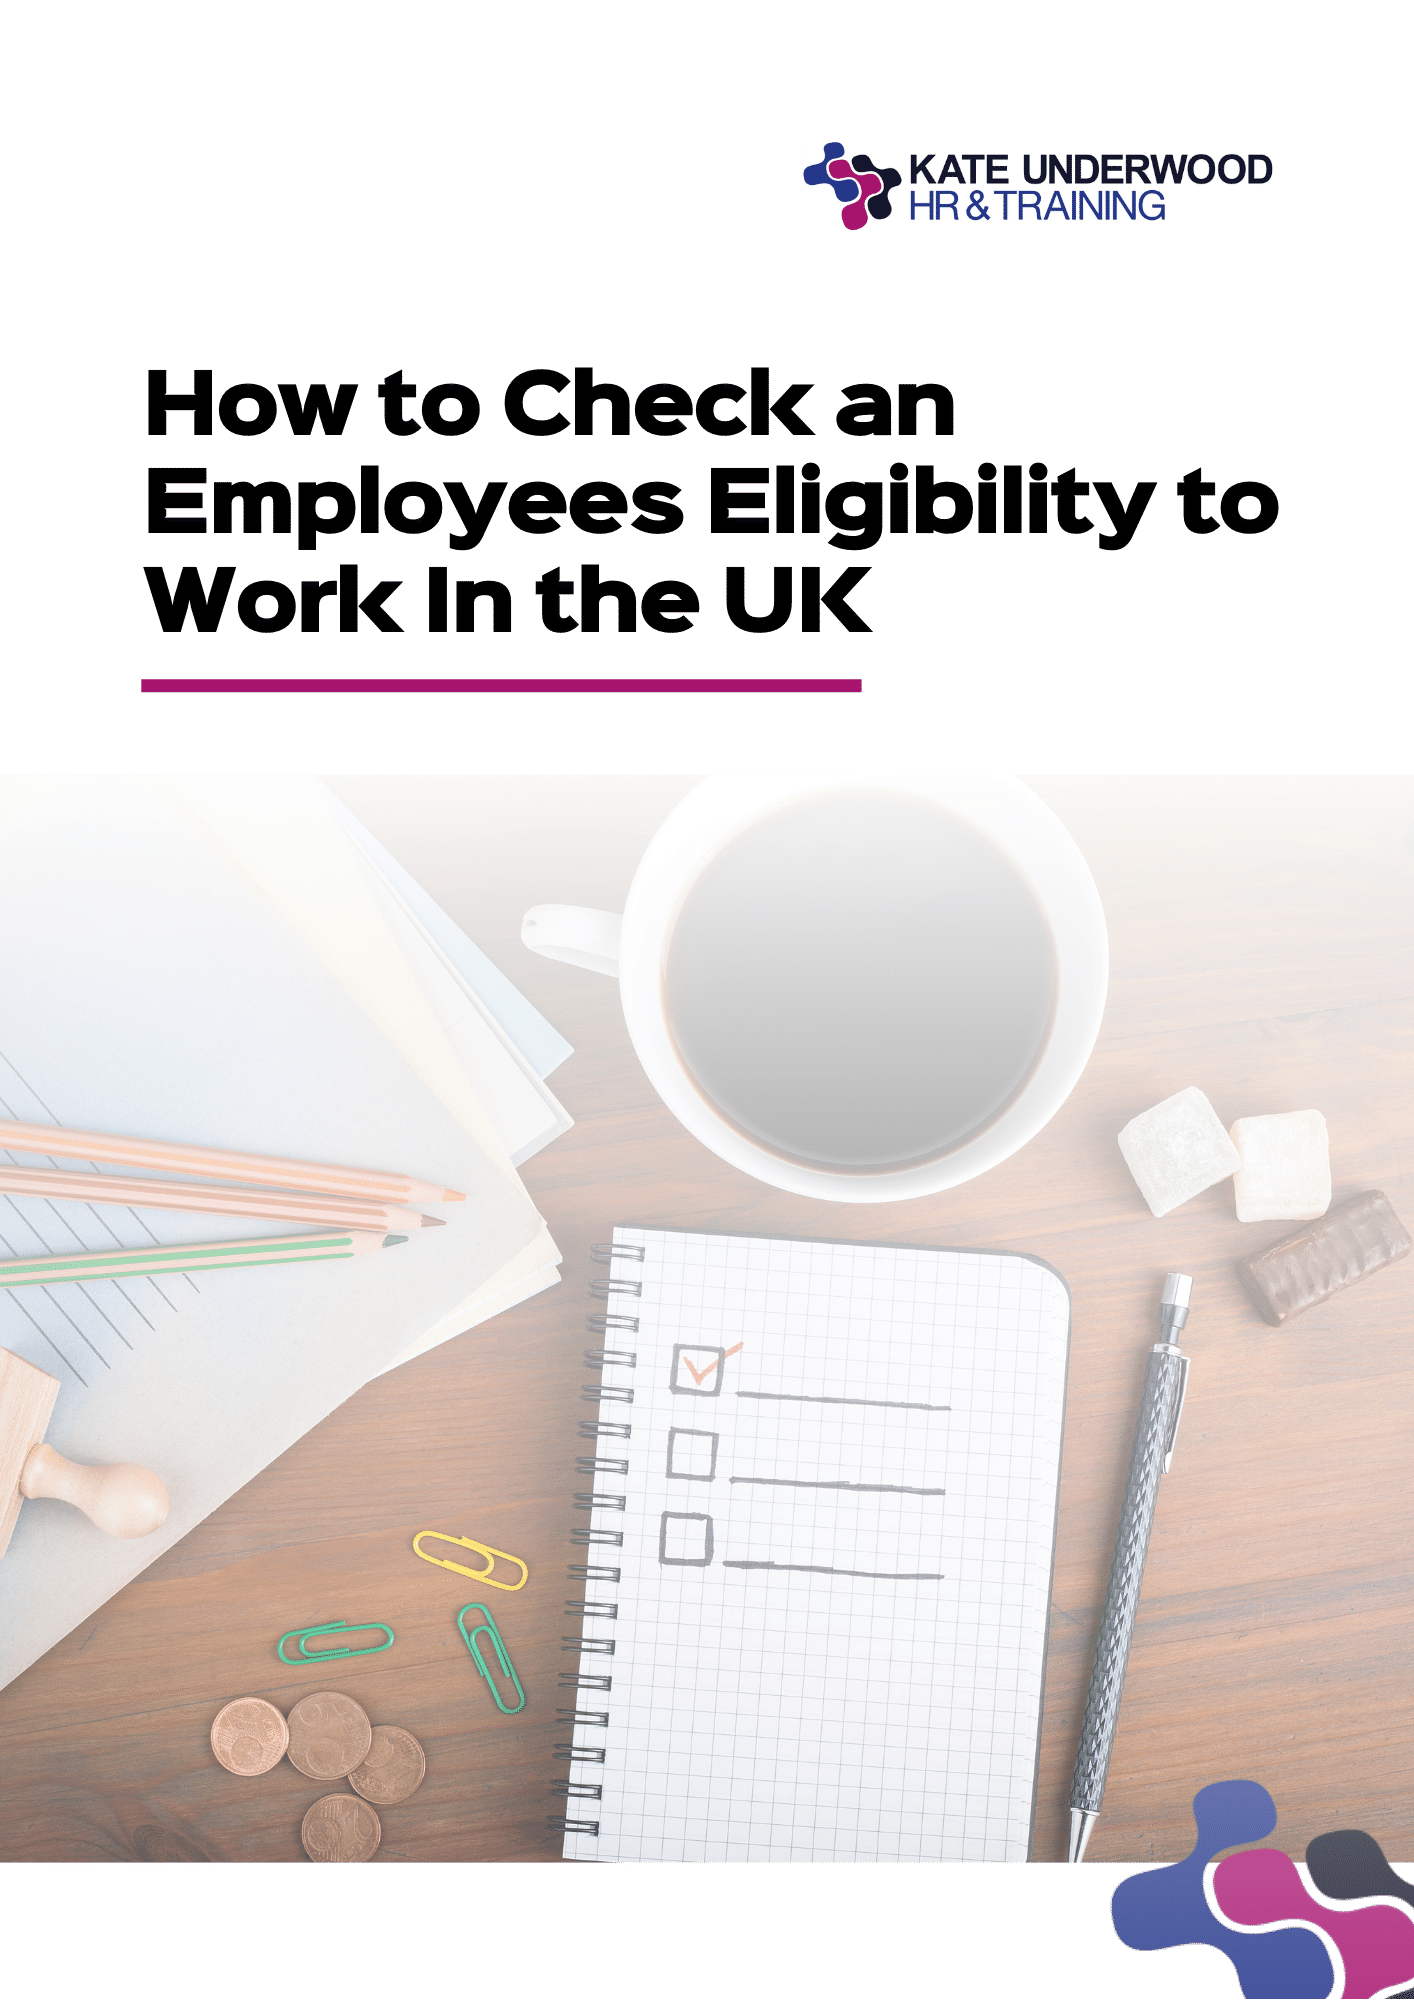 How to Check an Employees Eligibility to Work in the UK